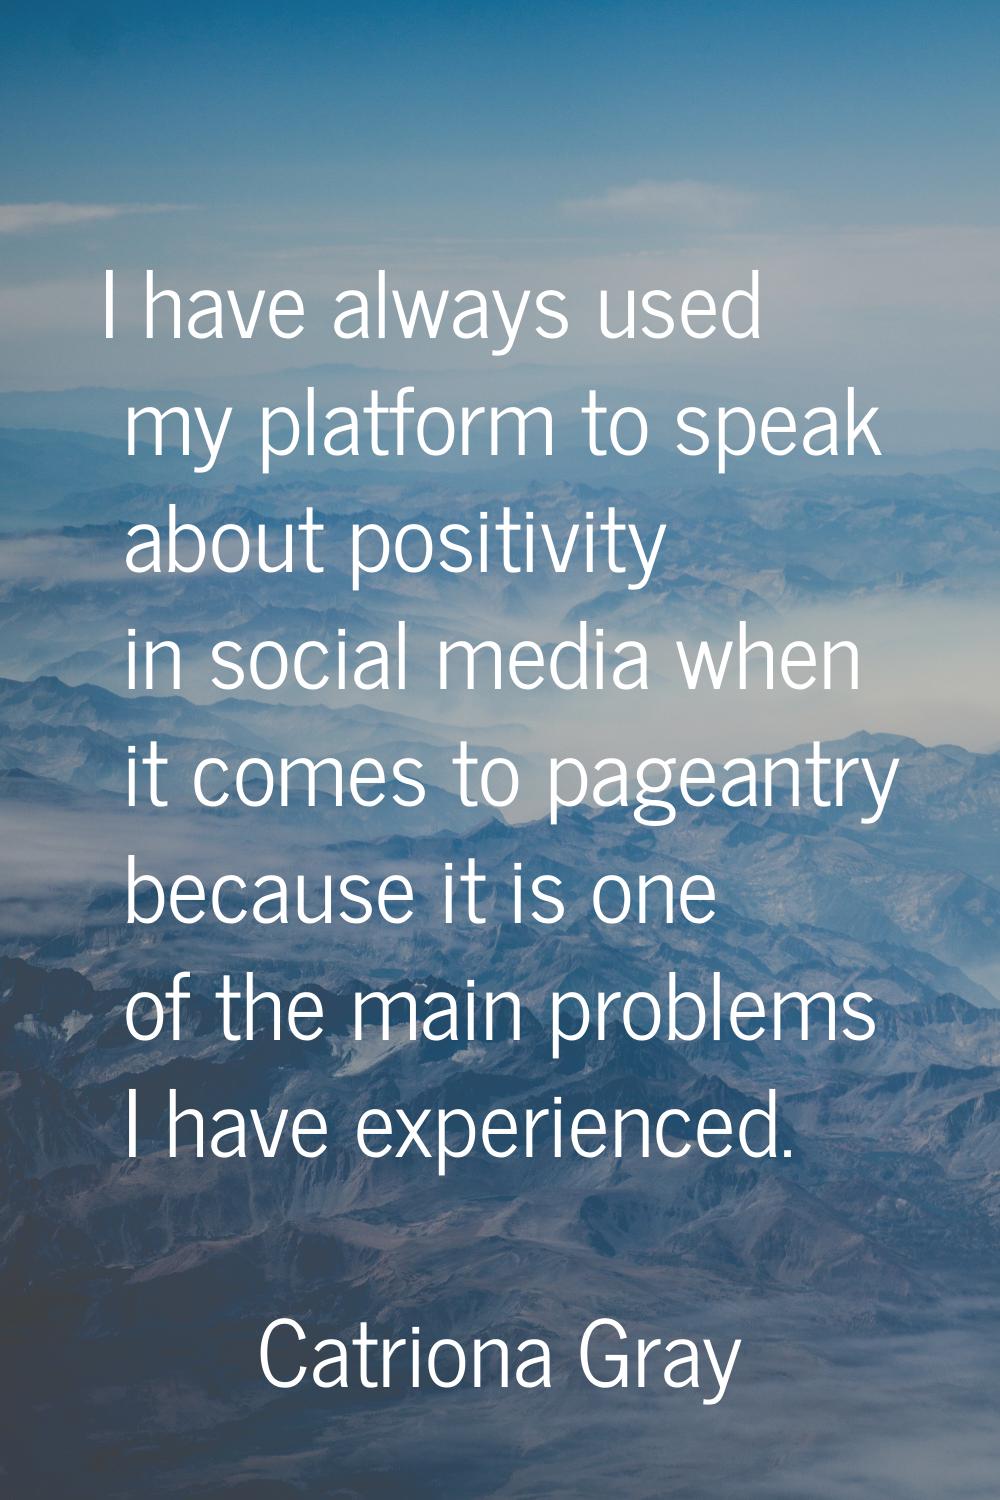 I have always used my platform to speak about positivity in social media when it comes to pageantry